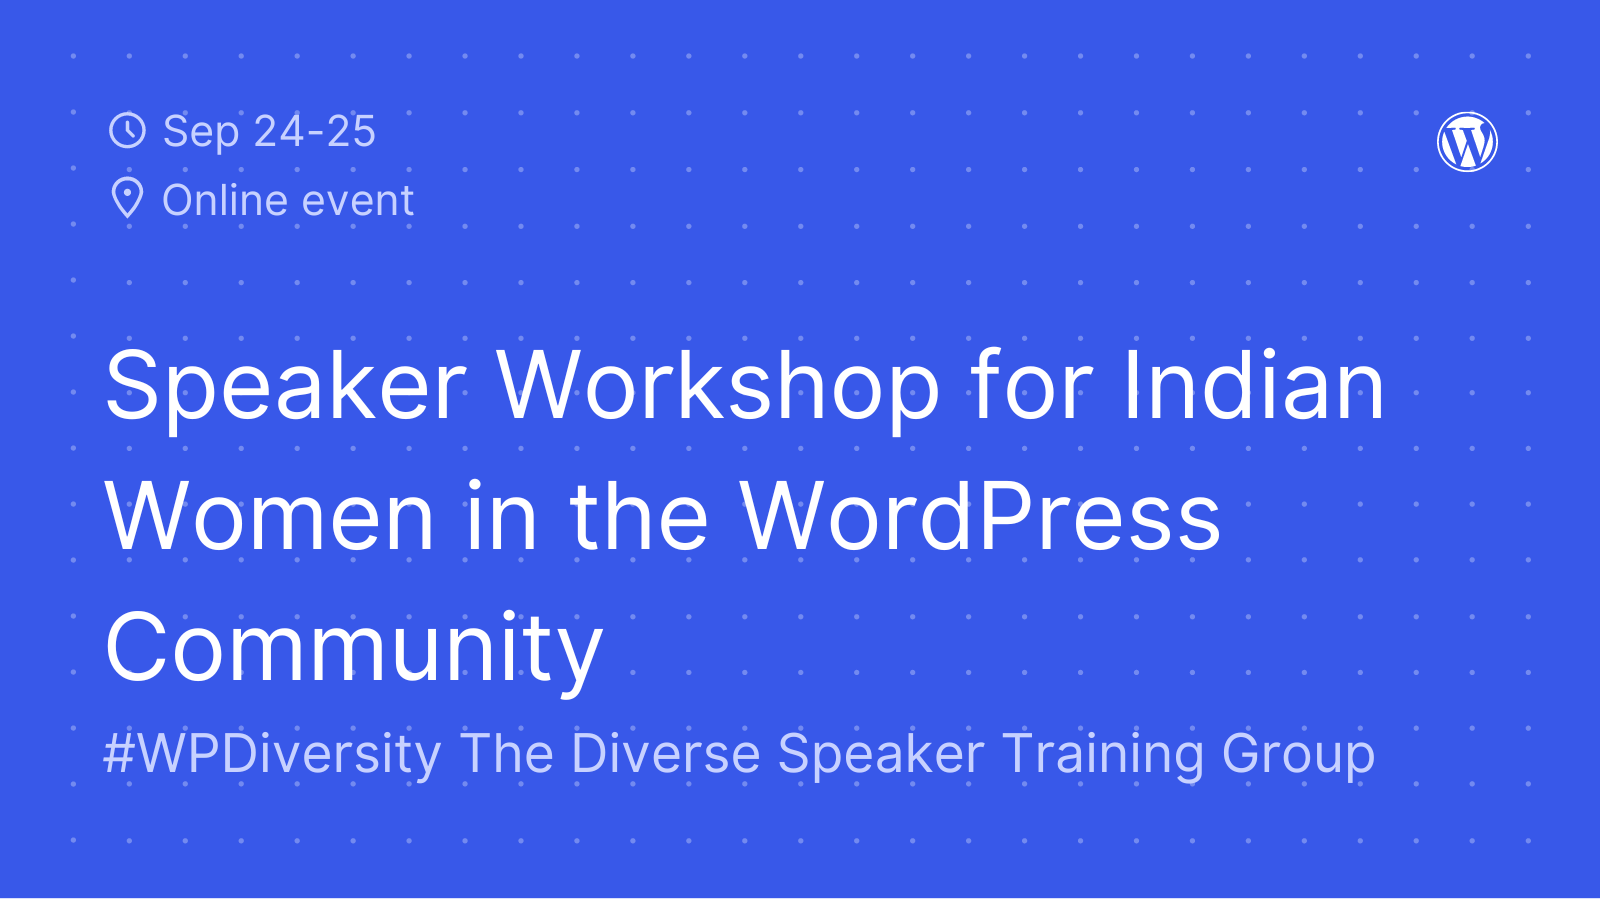 Blue background with text: Sep 24-25. Online event. Speaker Workshop for Indian Women in the WordPress Community. #WPDiversity The Diverse Speaker Training Group